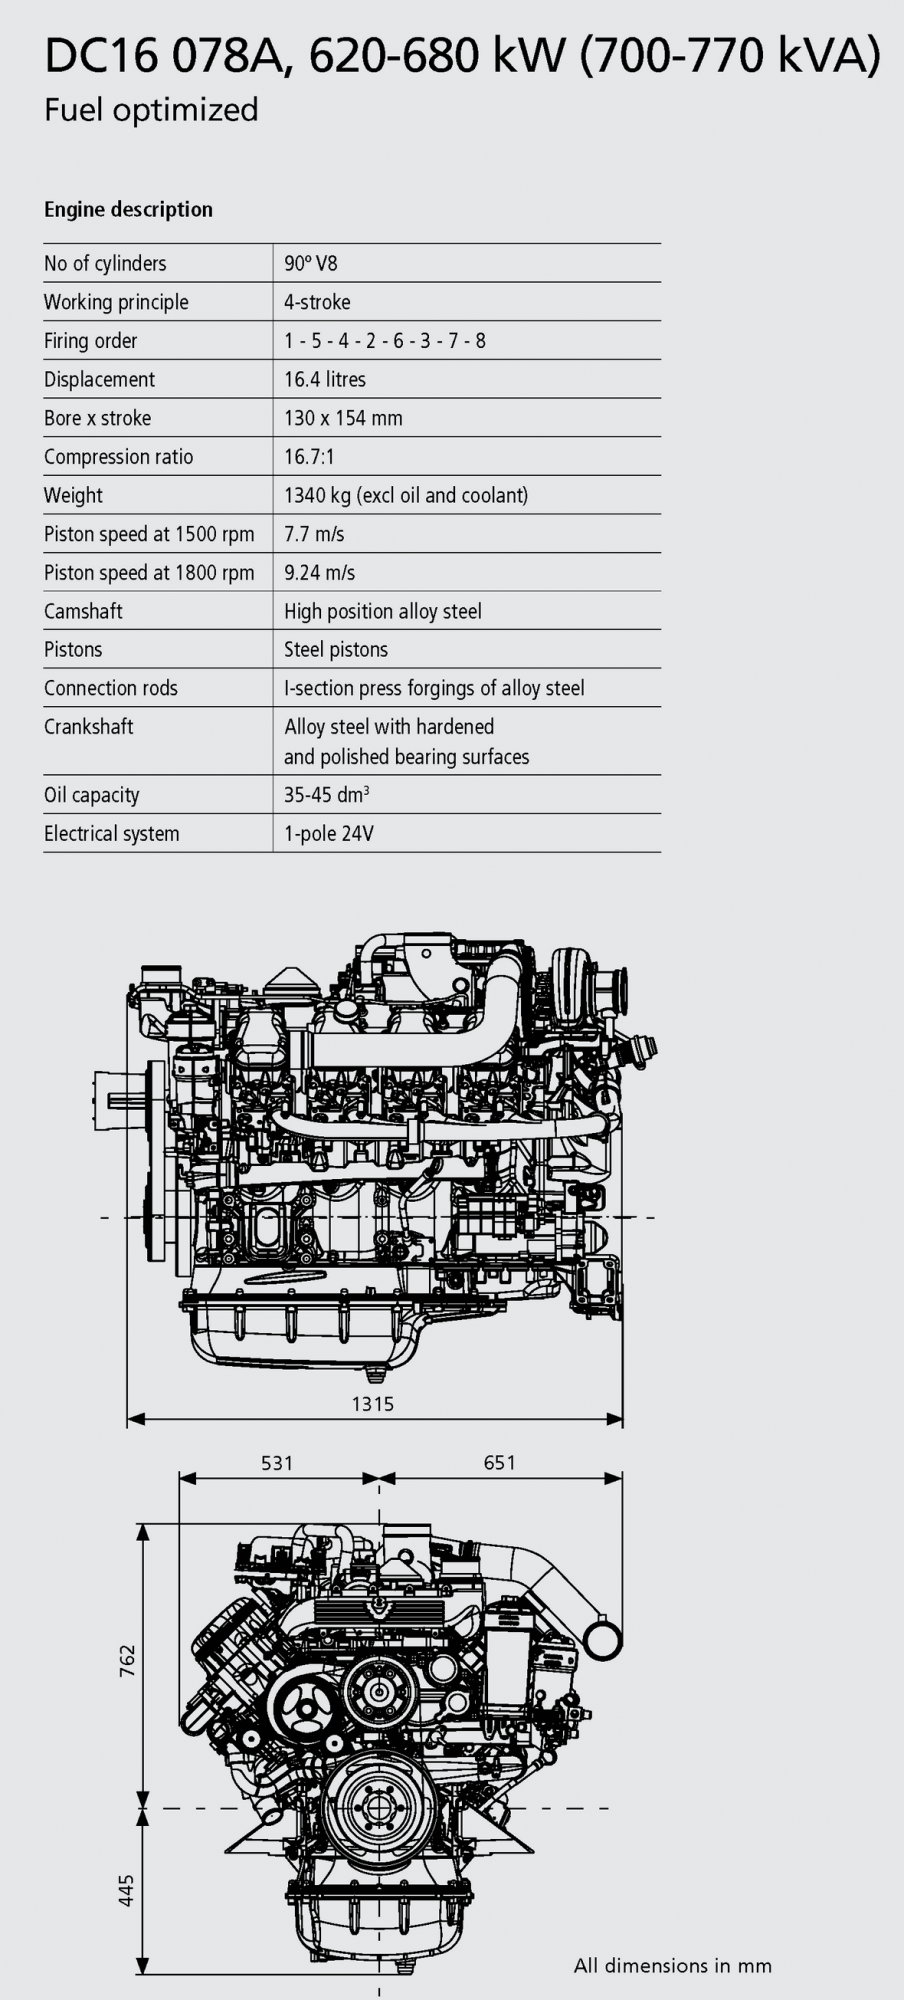 DC1678A_620-680kW_2.png